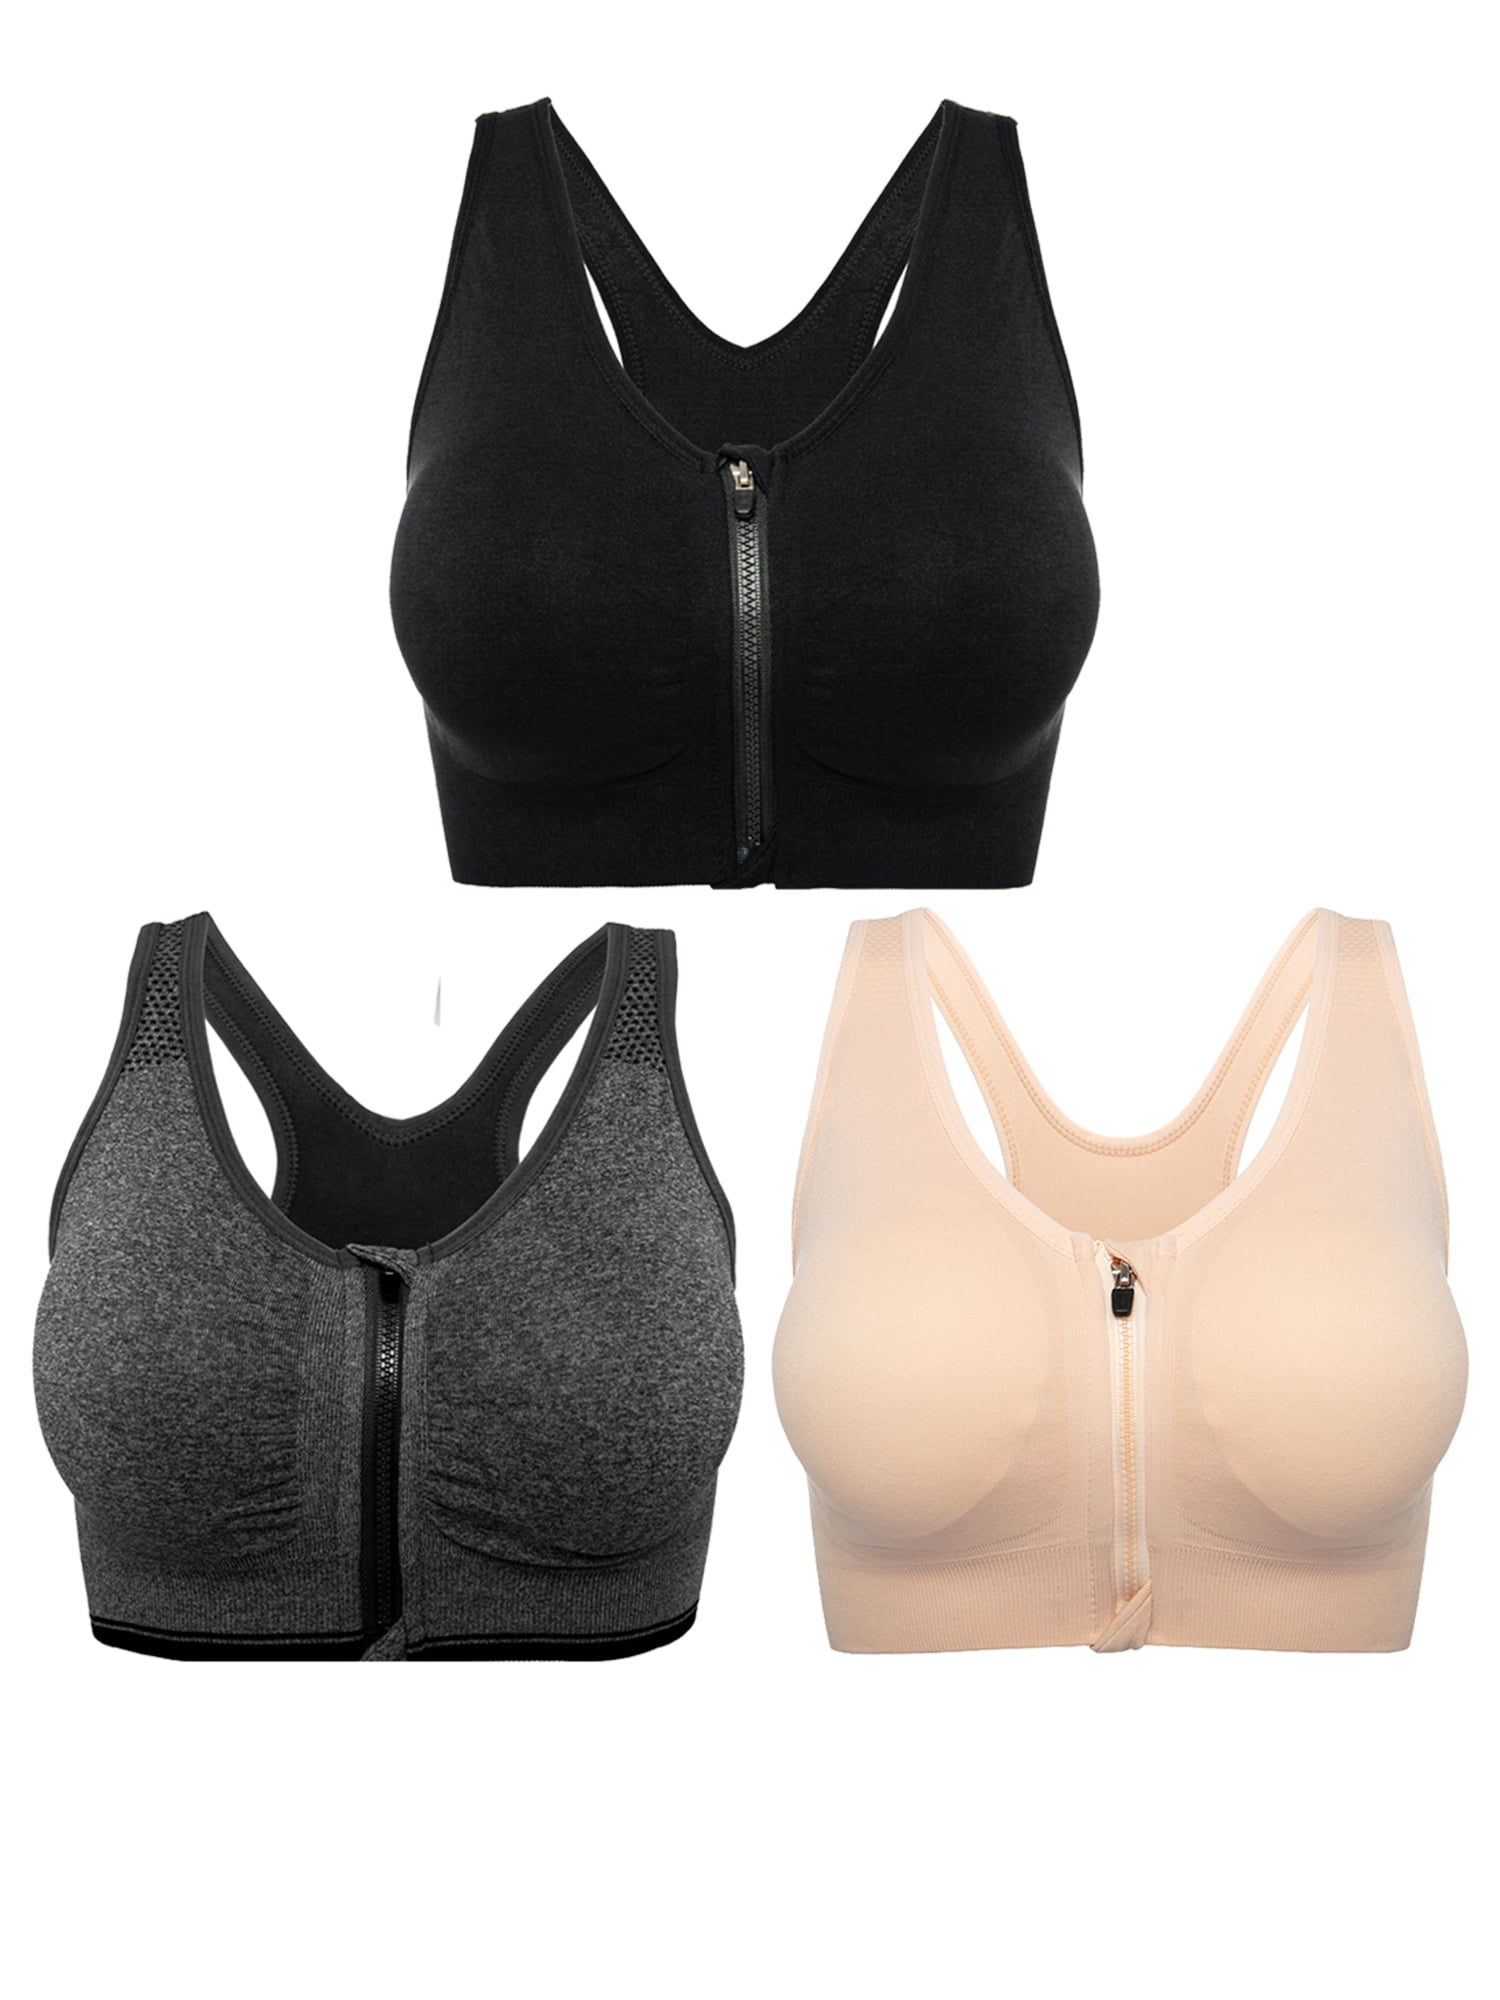  Fapreit Womens Zip Front Closure Sports Bra - Seamless  Wirefree Post Surgery Padded Racerback Workout Gym Yoga Bras 2 Pack